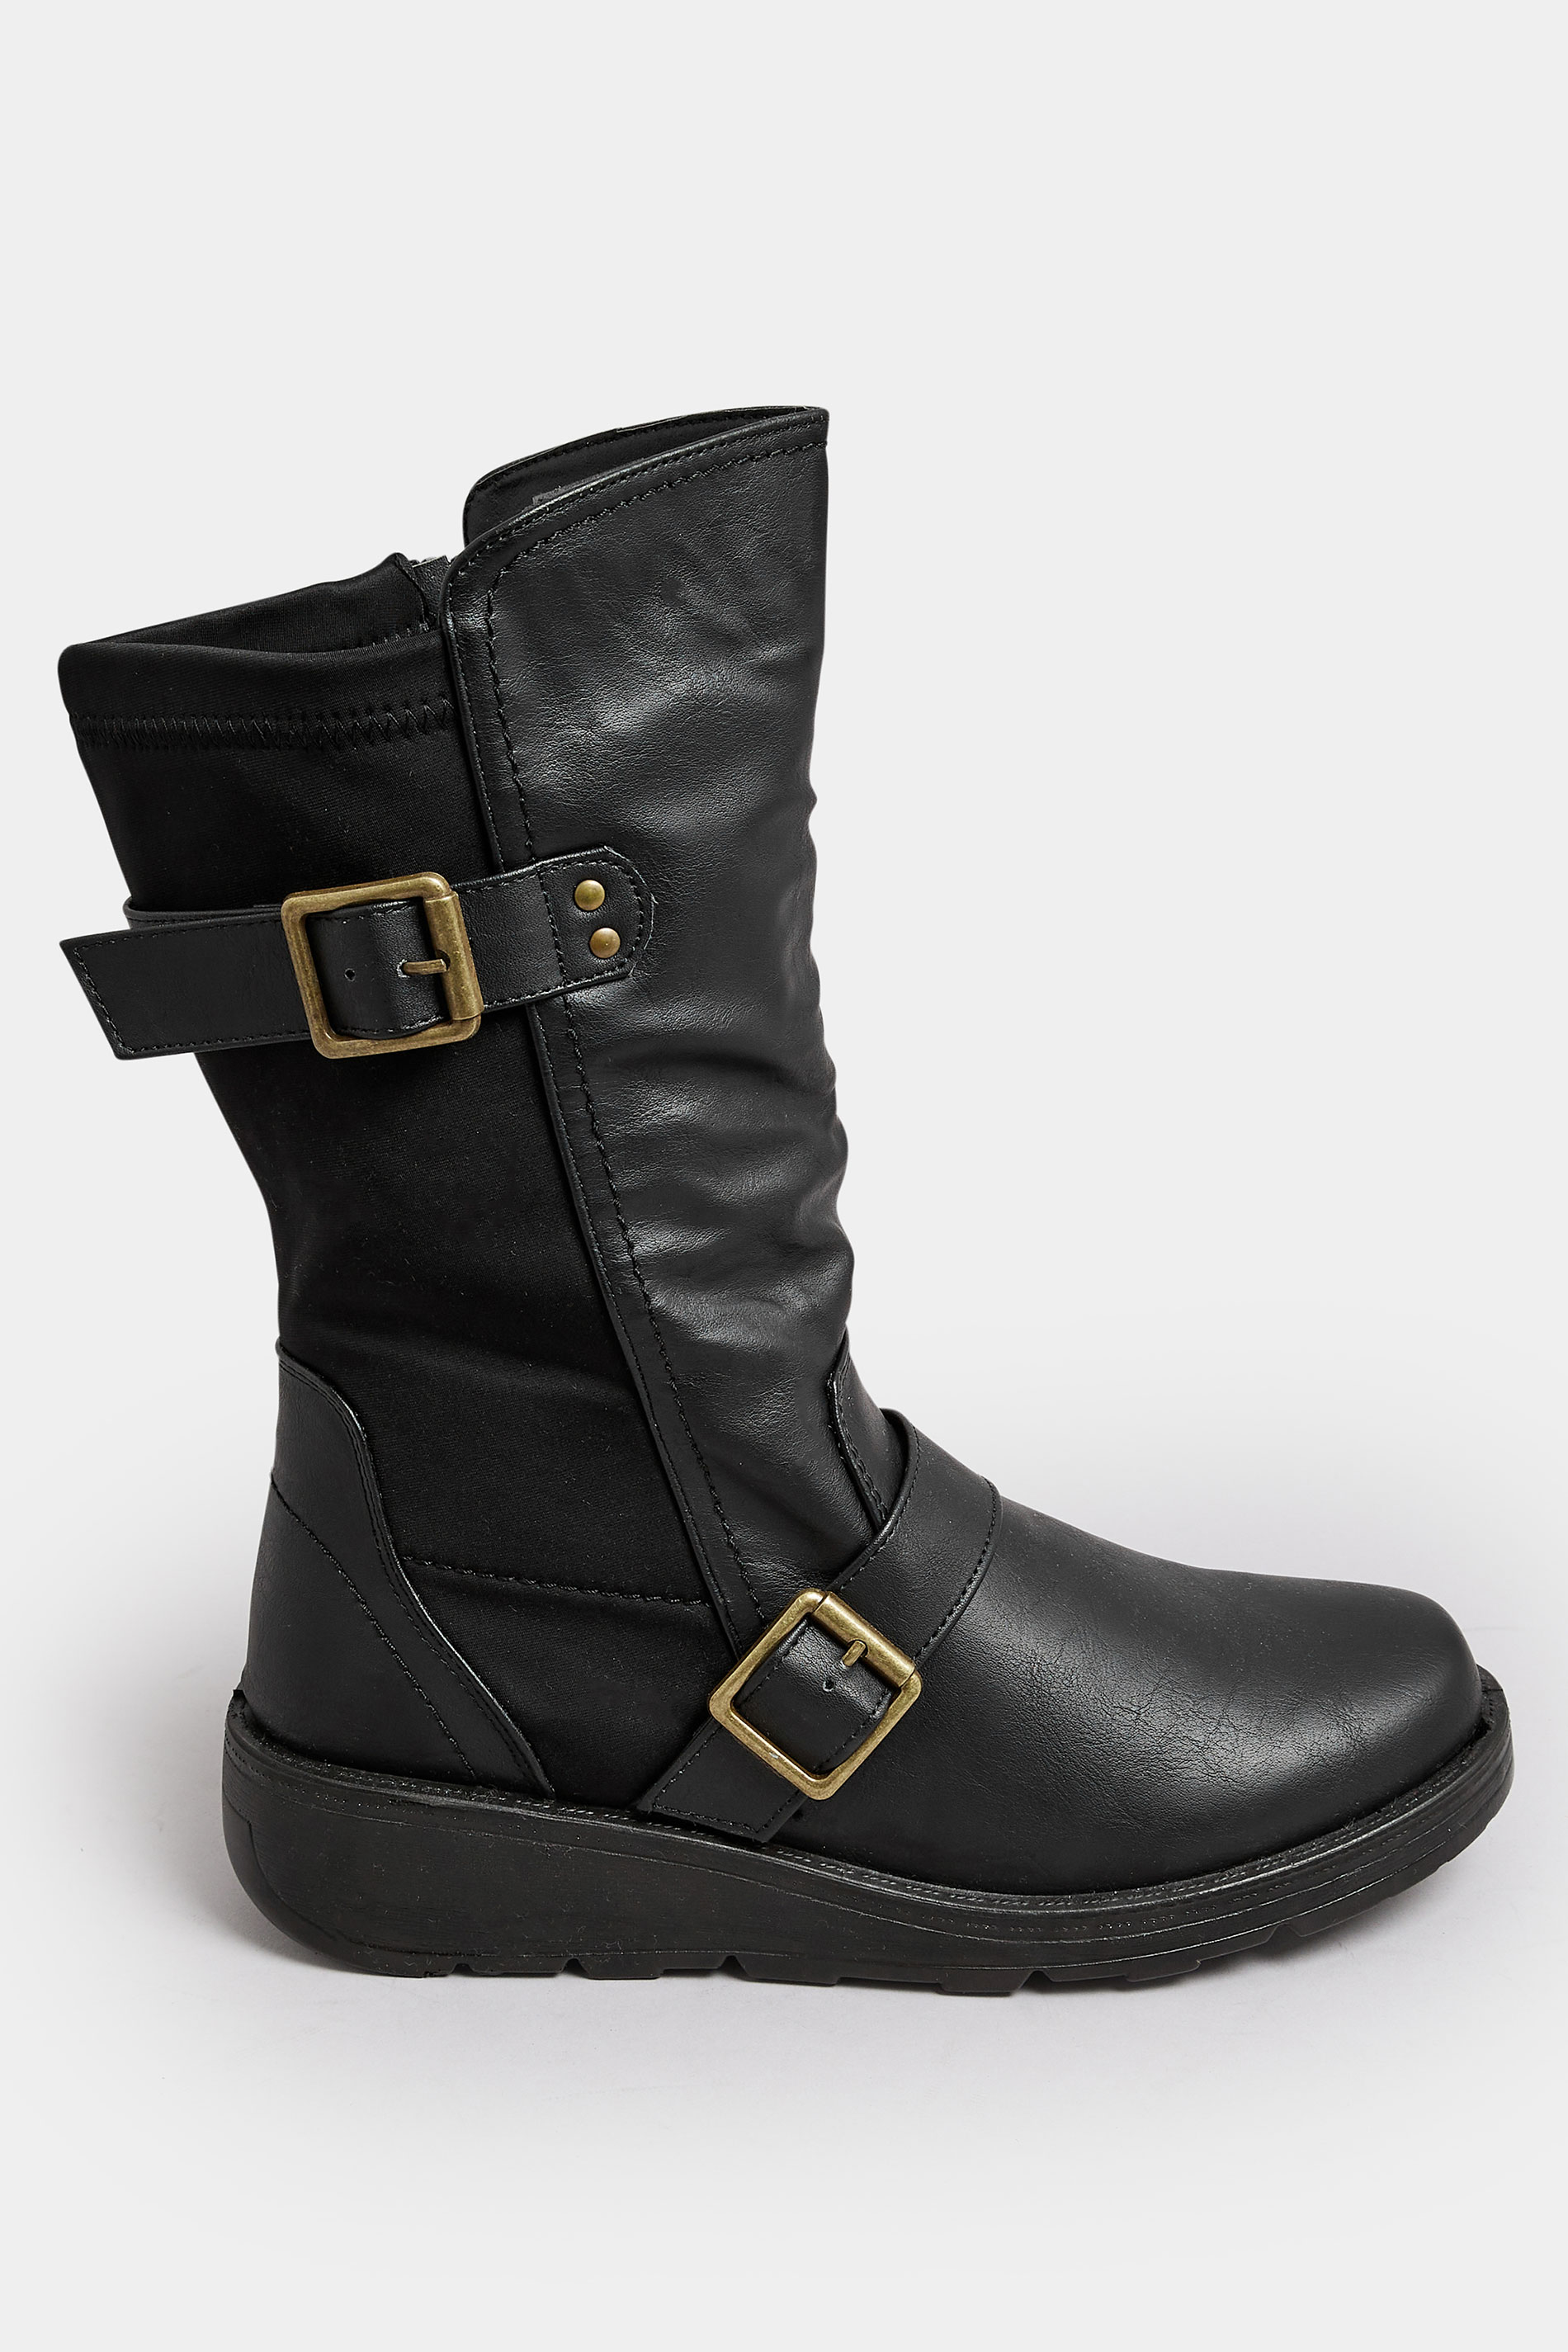 Black Faux Leather Wedge Buckle Boots In Extra Wide EEE Fit | Yours Clothing 3